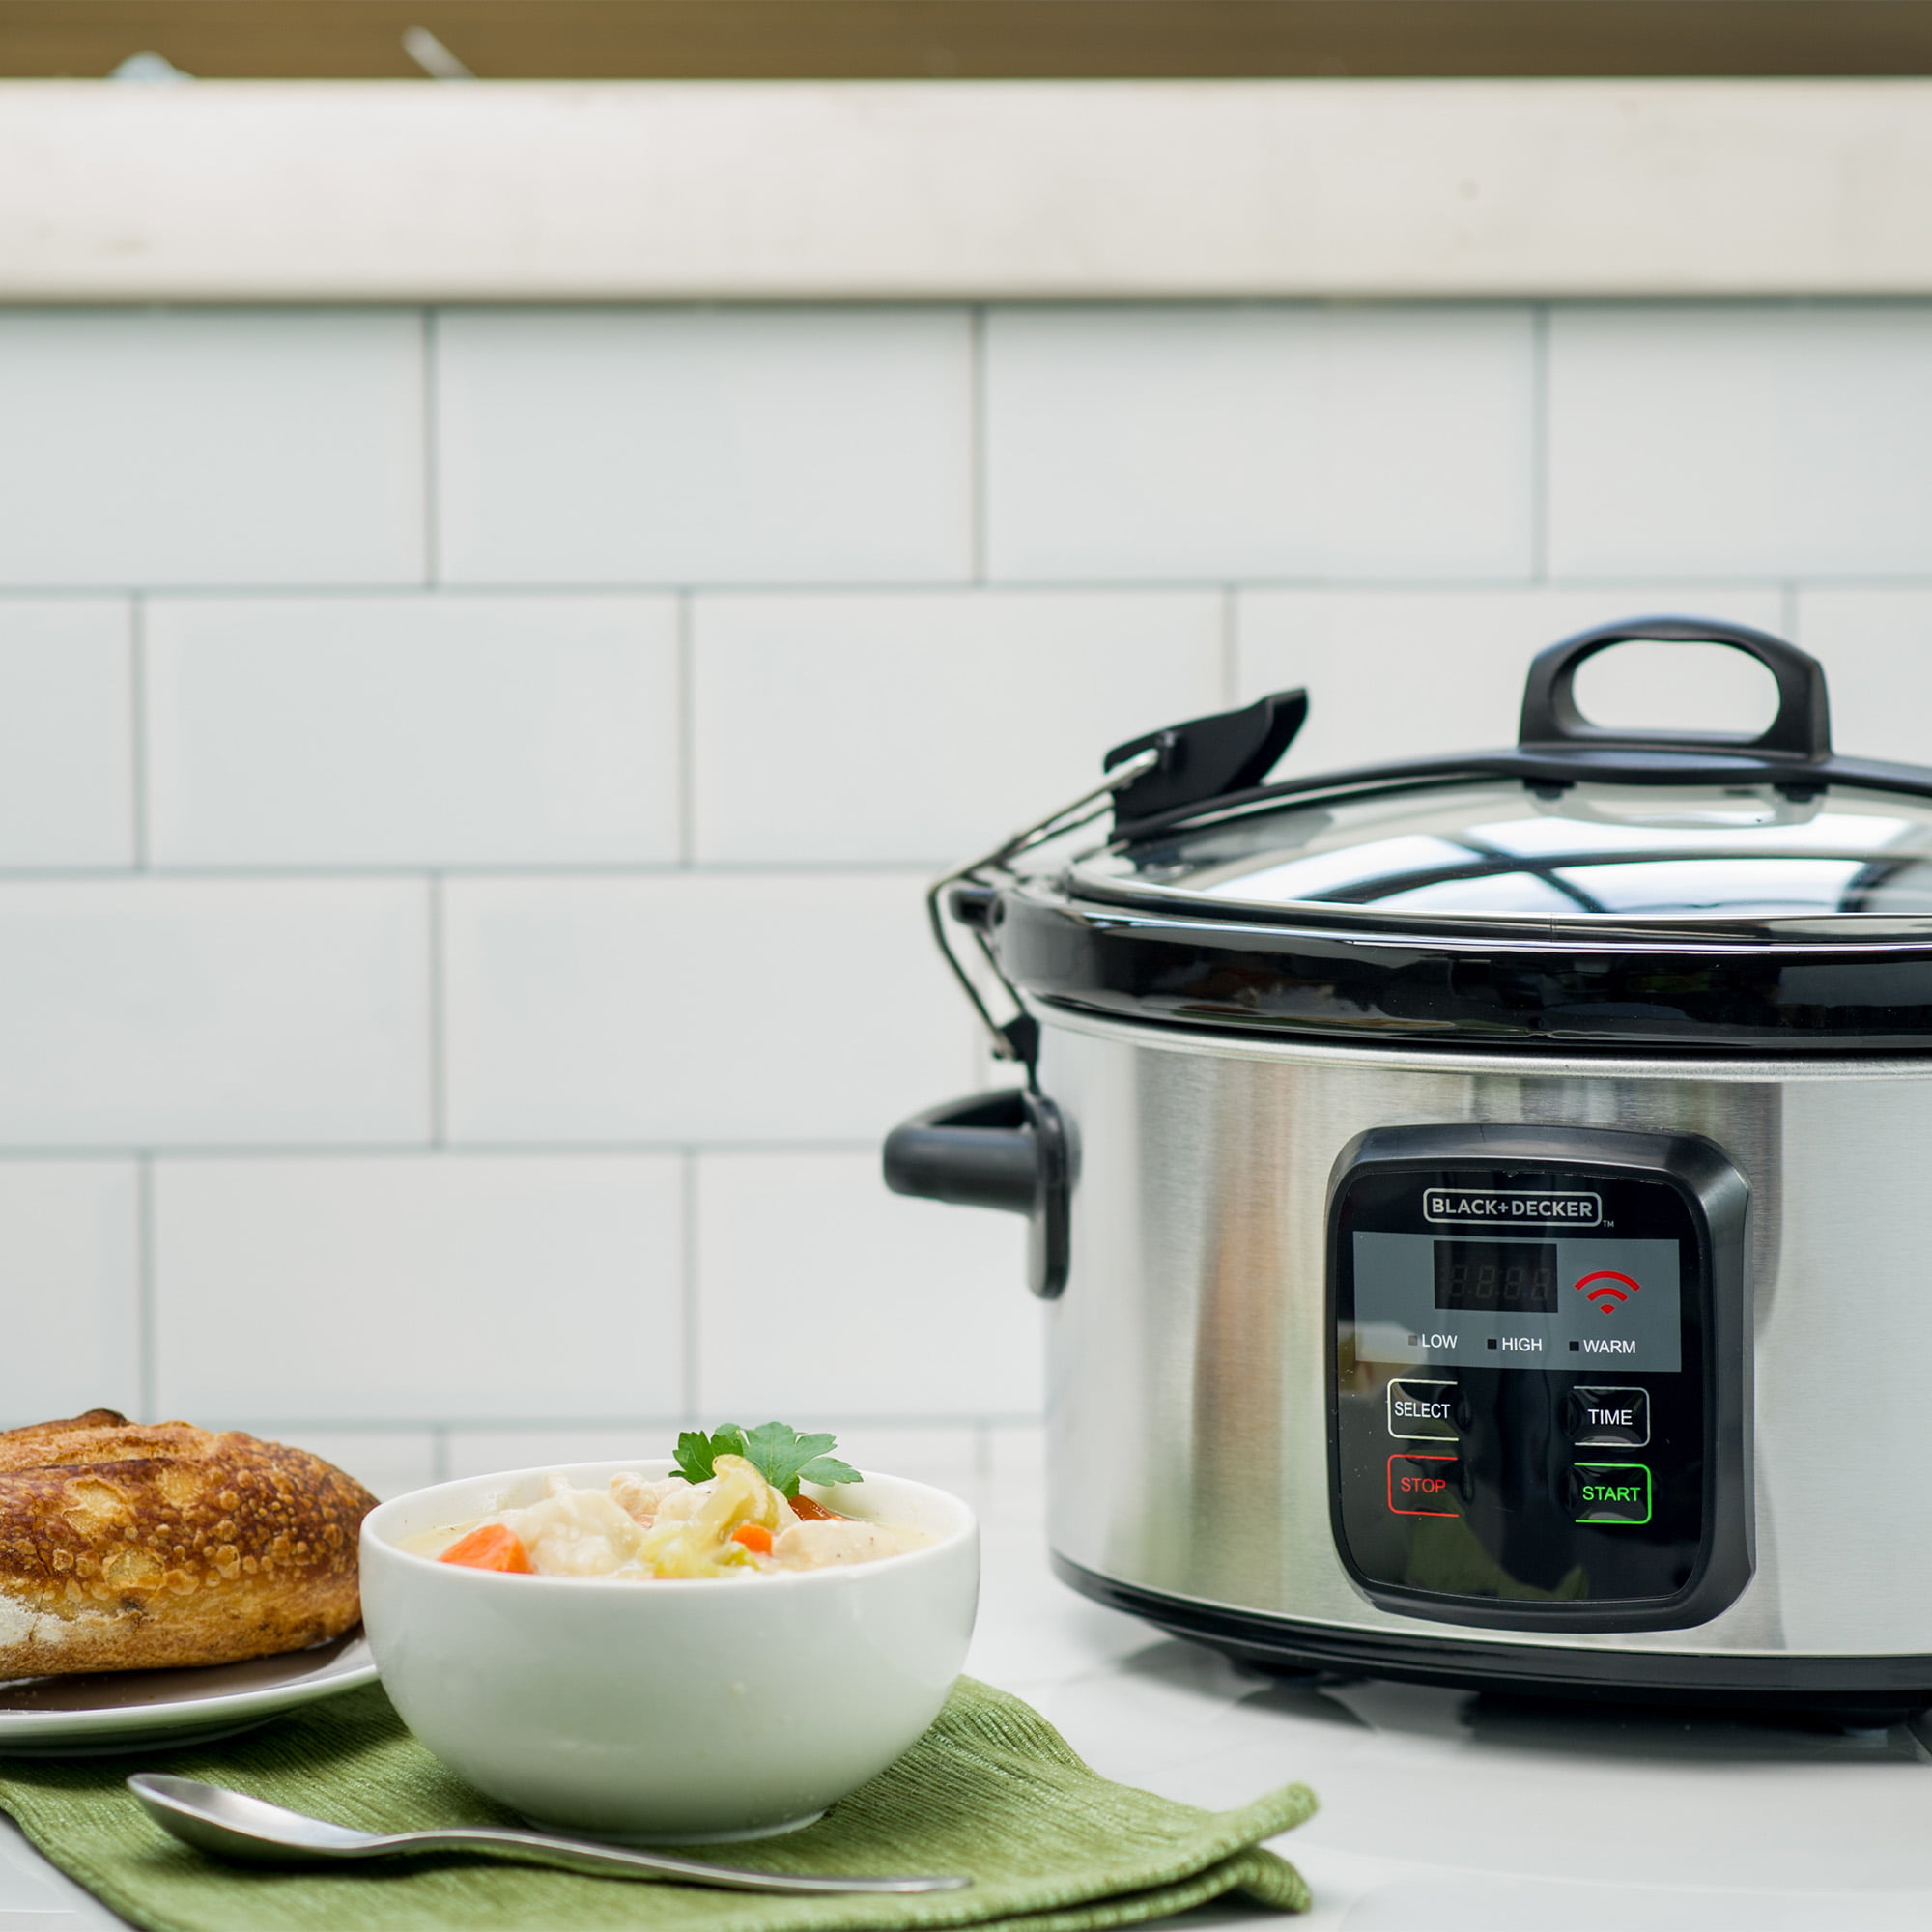 New Black and Decker 3 Pot Slow Cooker- Great for